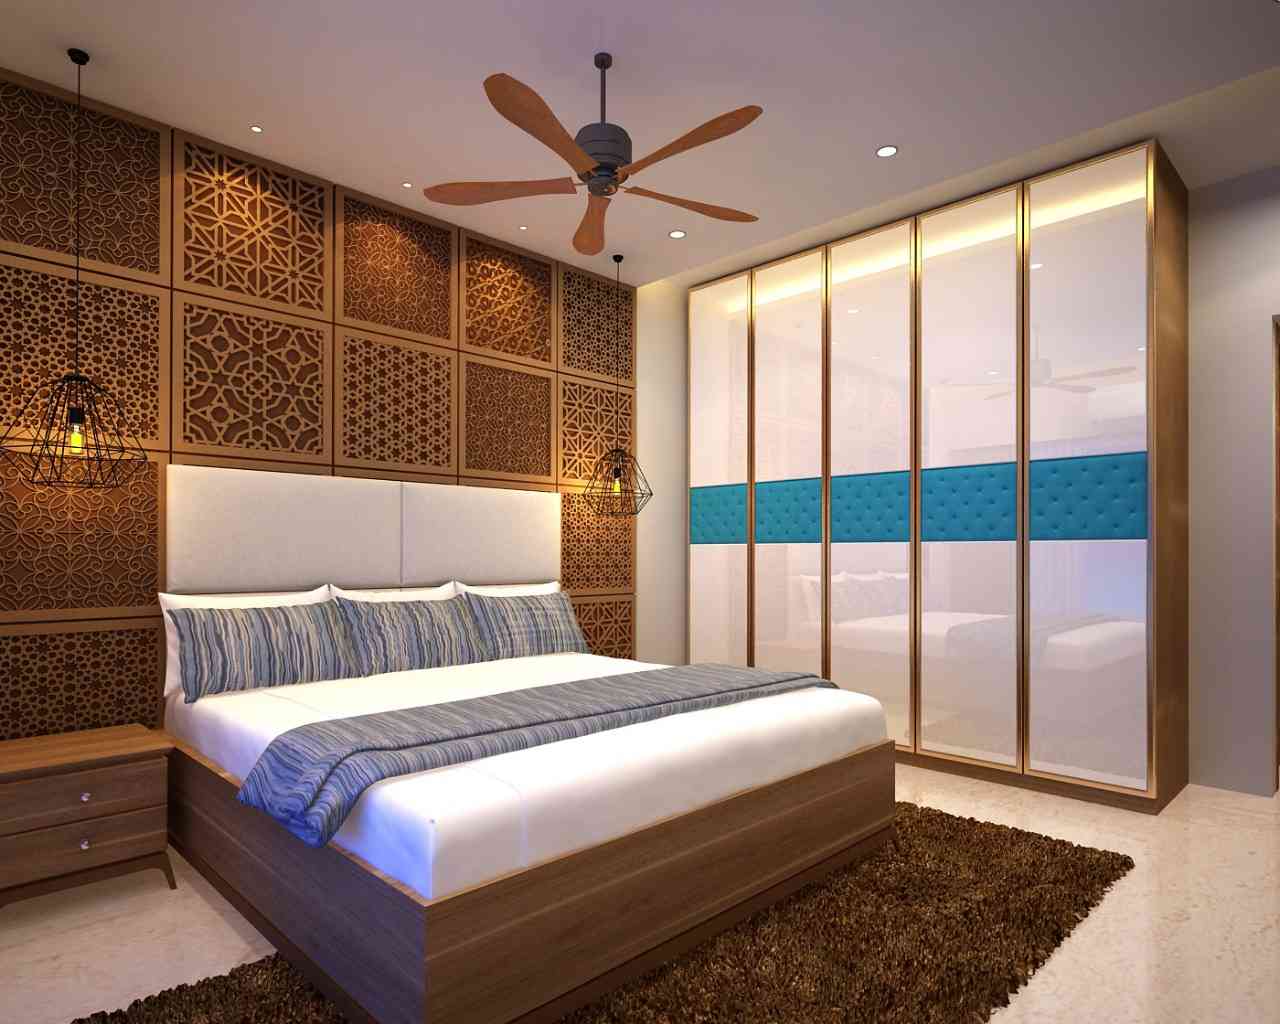 Bedroom Design With Wardrobe And GRC Jaali